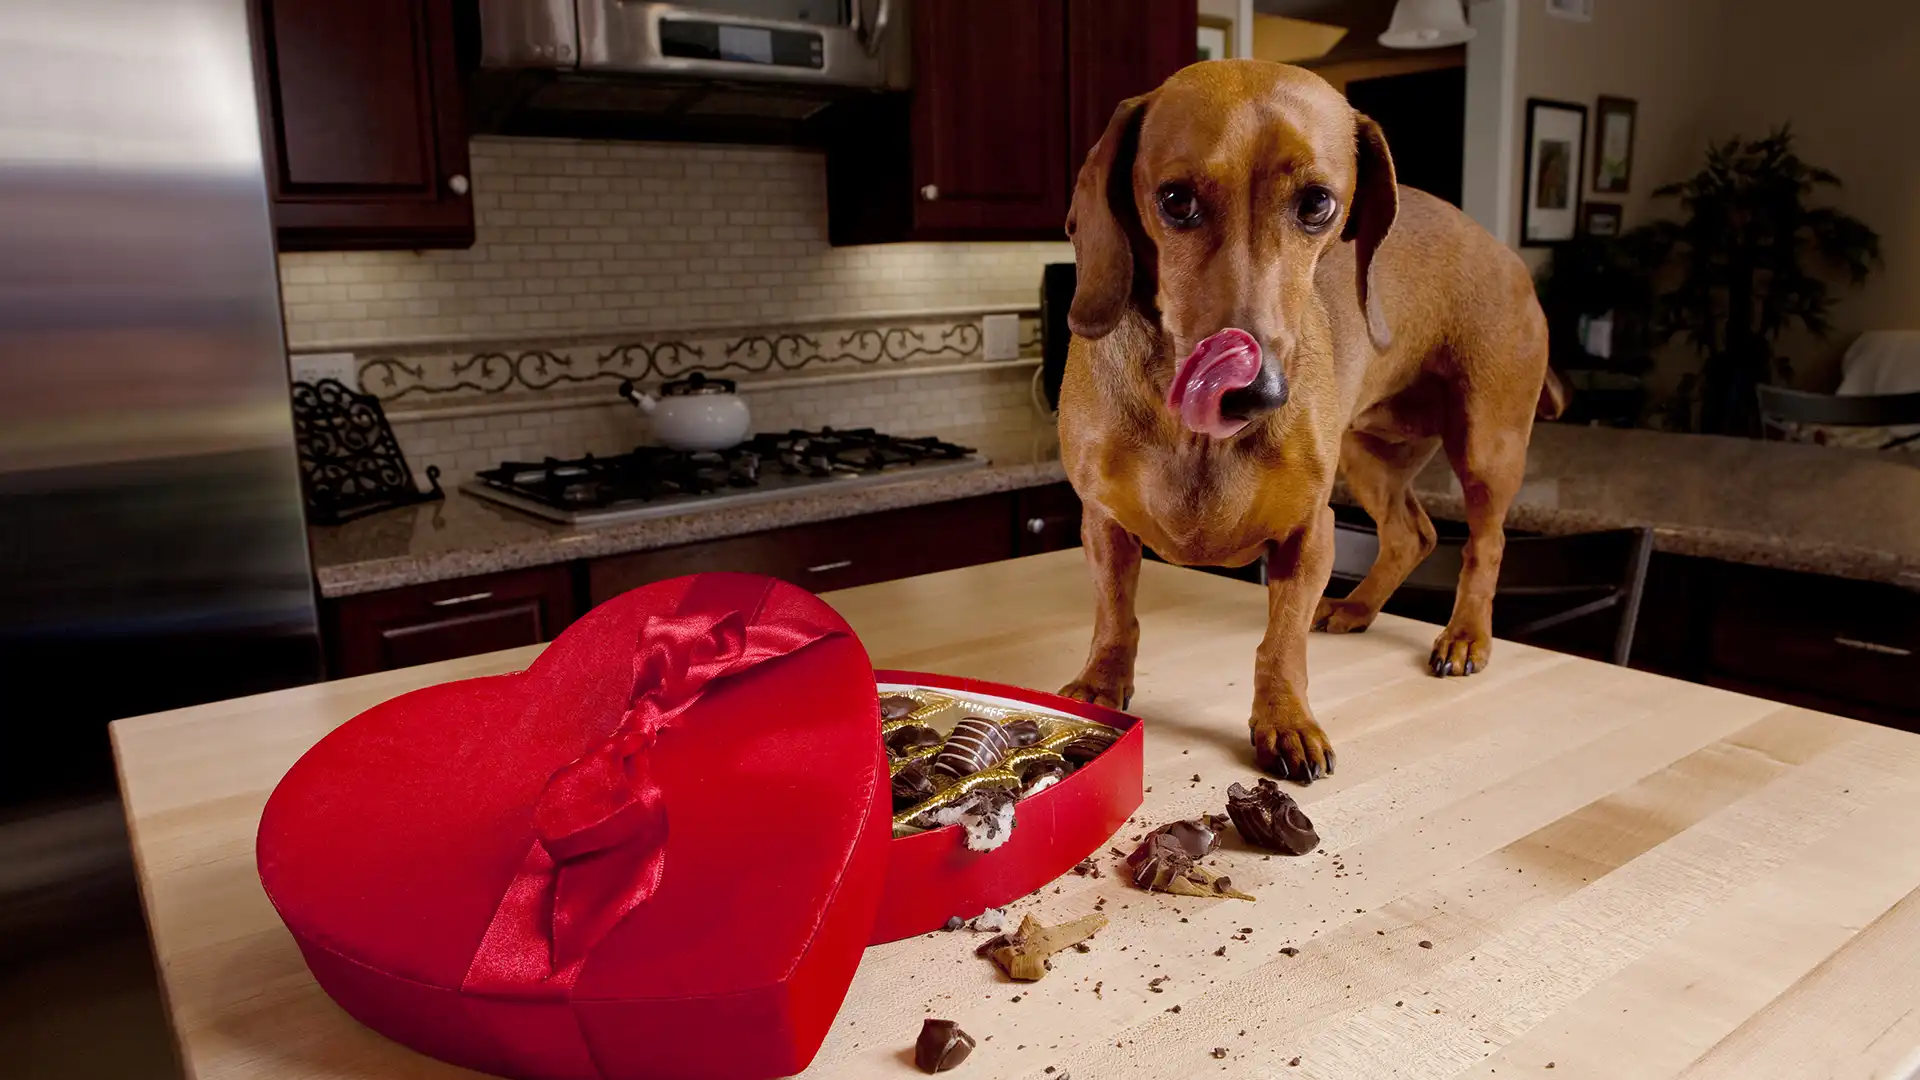 My dog ate chocolate – now what